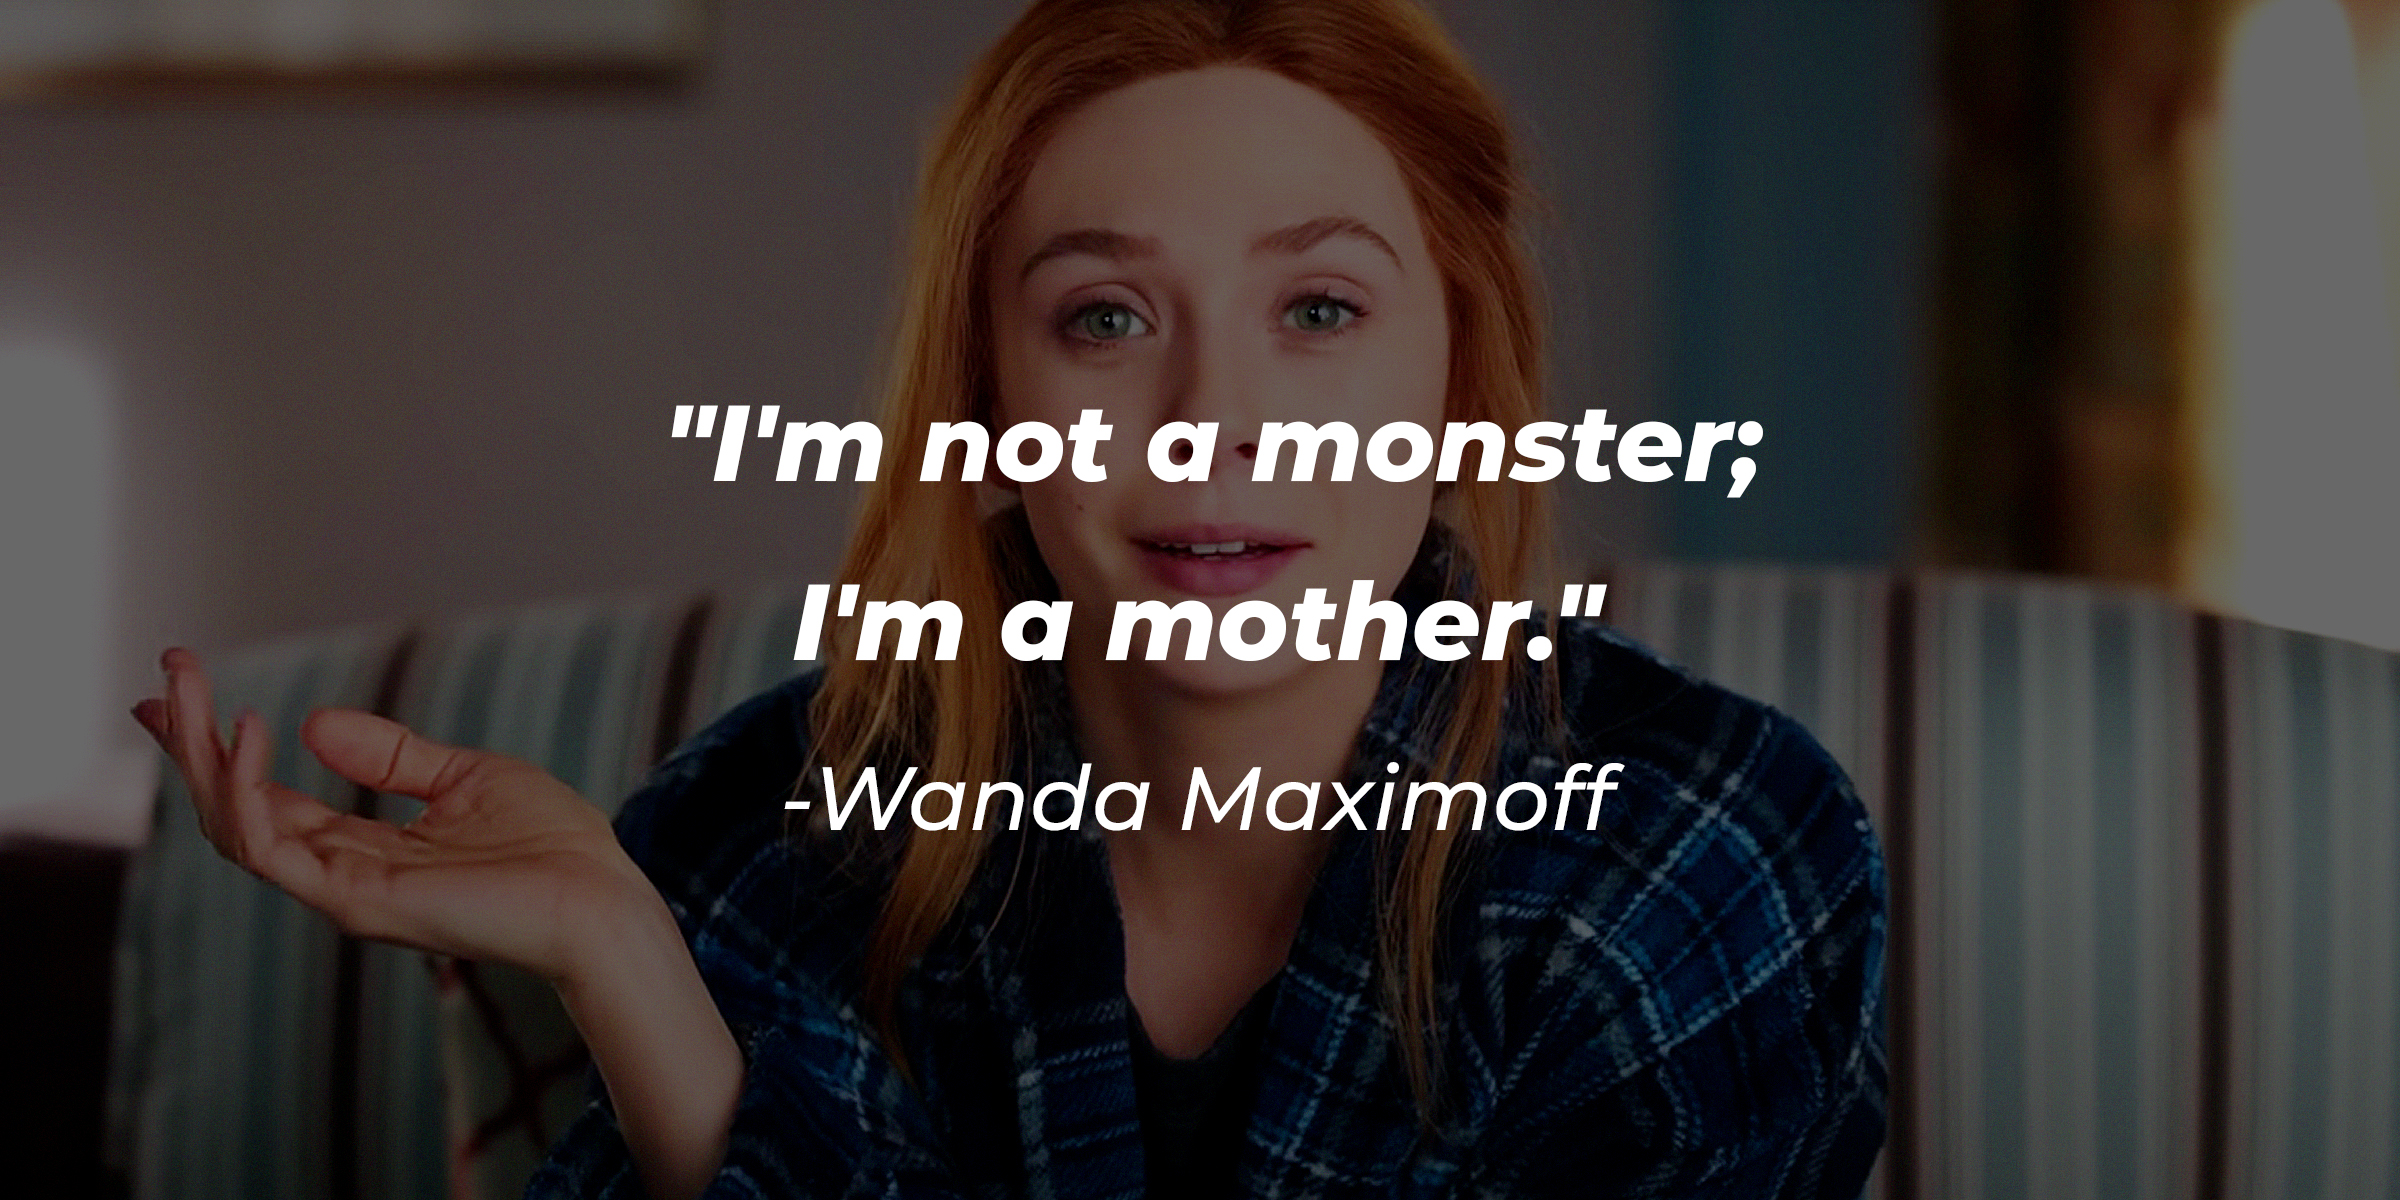 Wanda Maximoff's quote: "I'm not a monster; I'm a mother." | Source: Facebook/wandavisionofficial